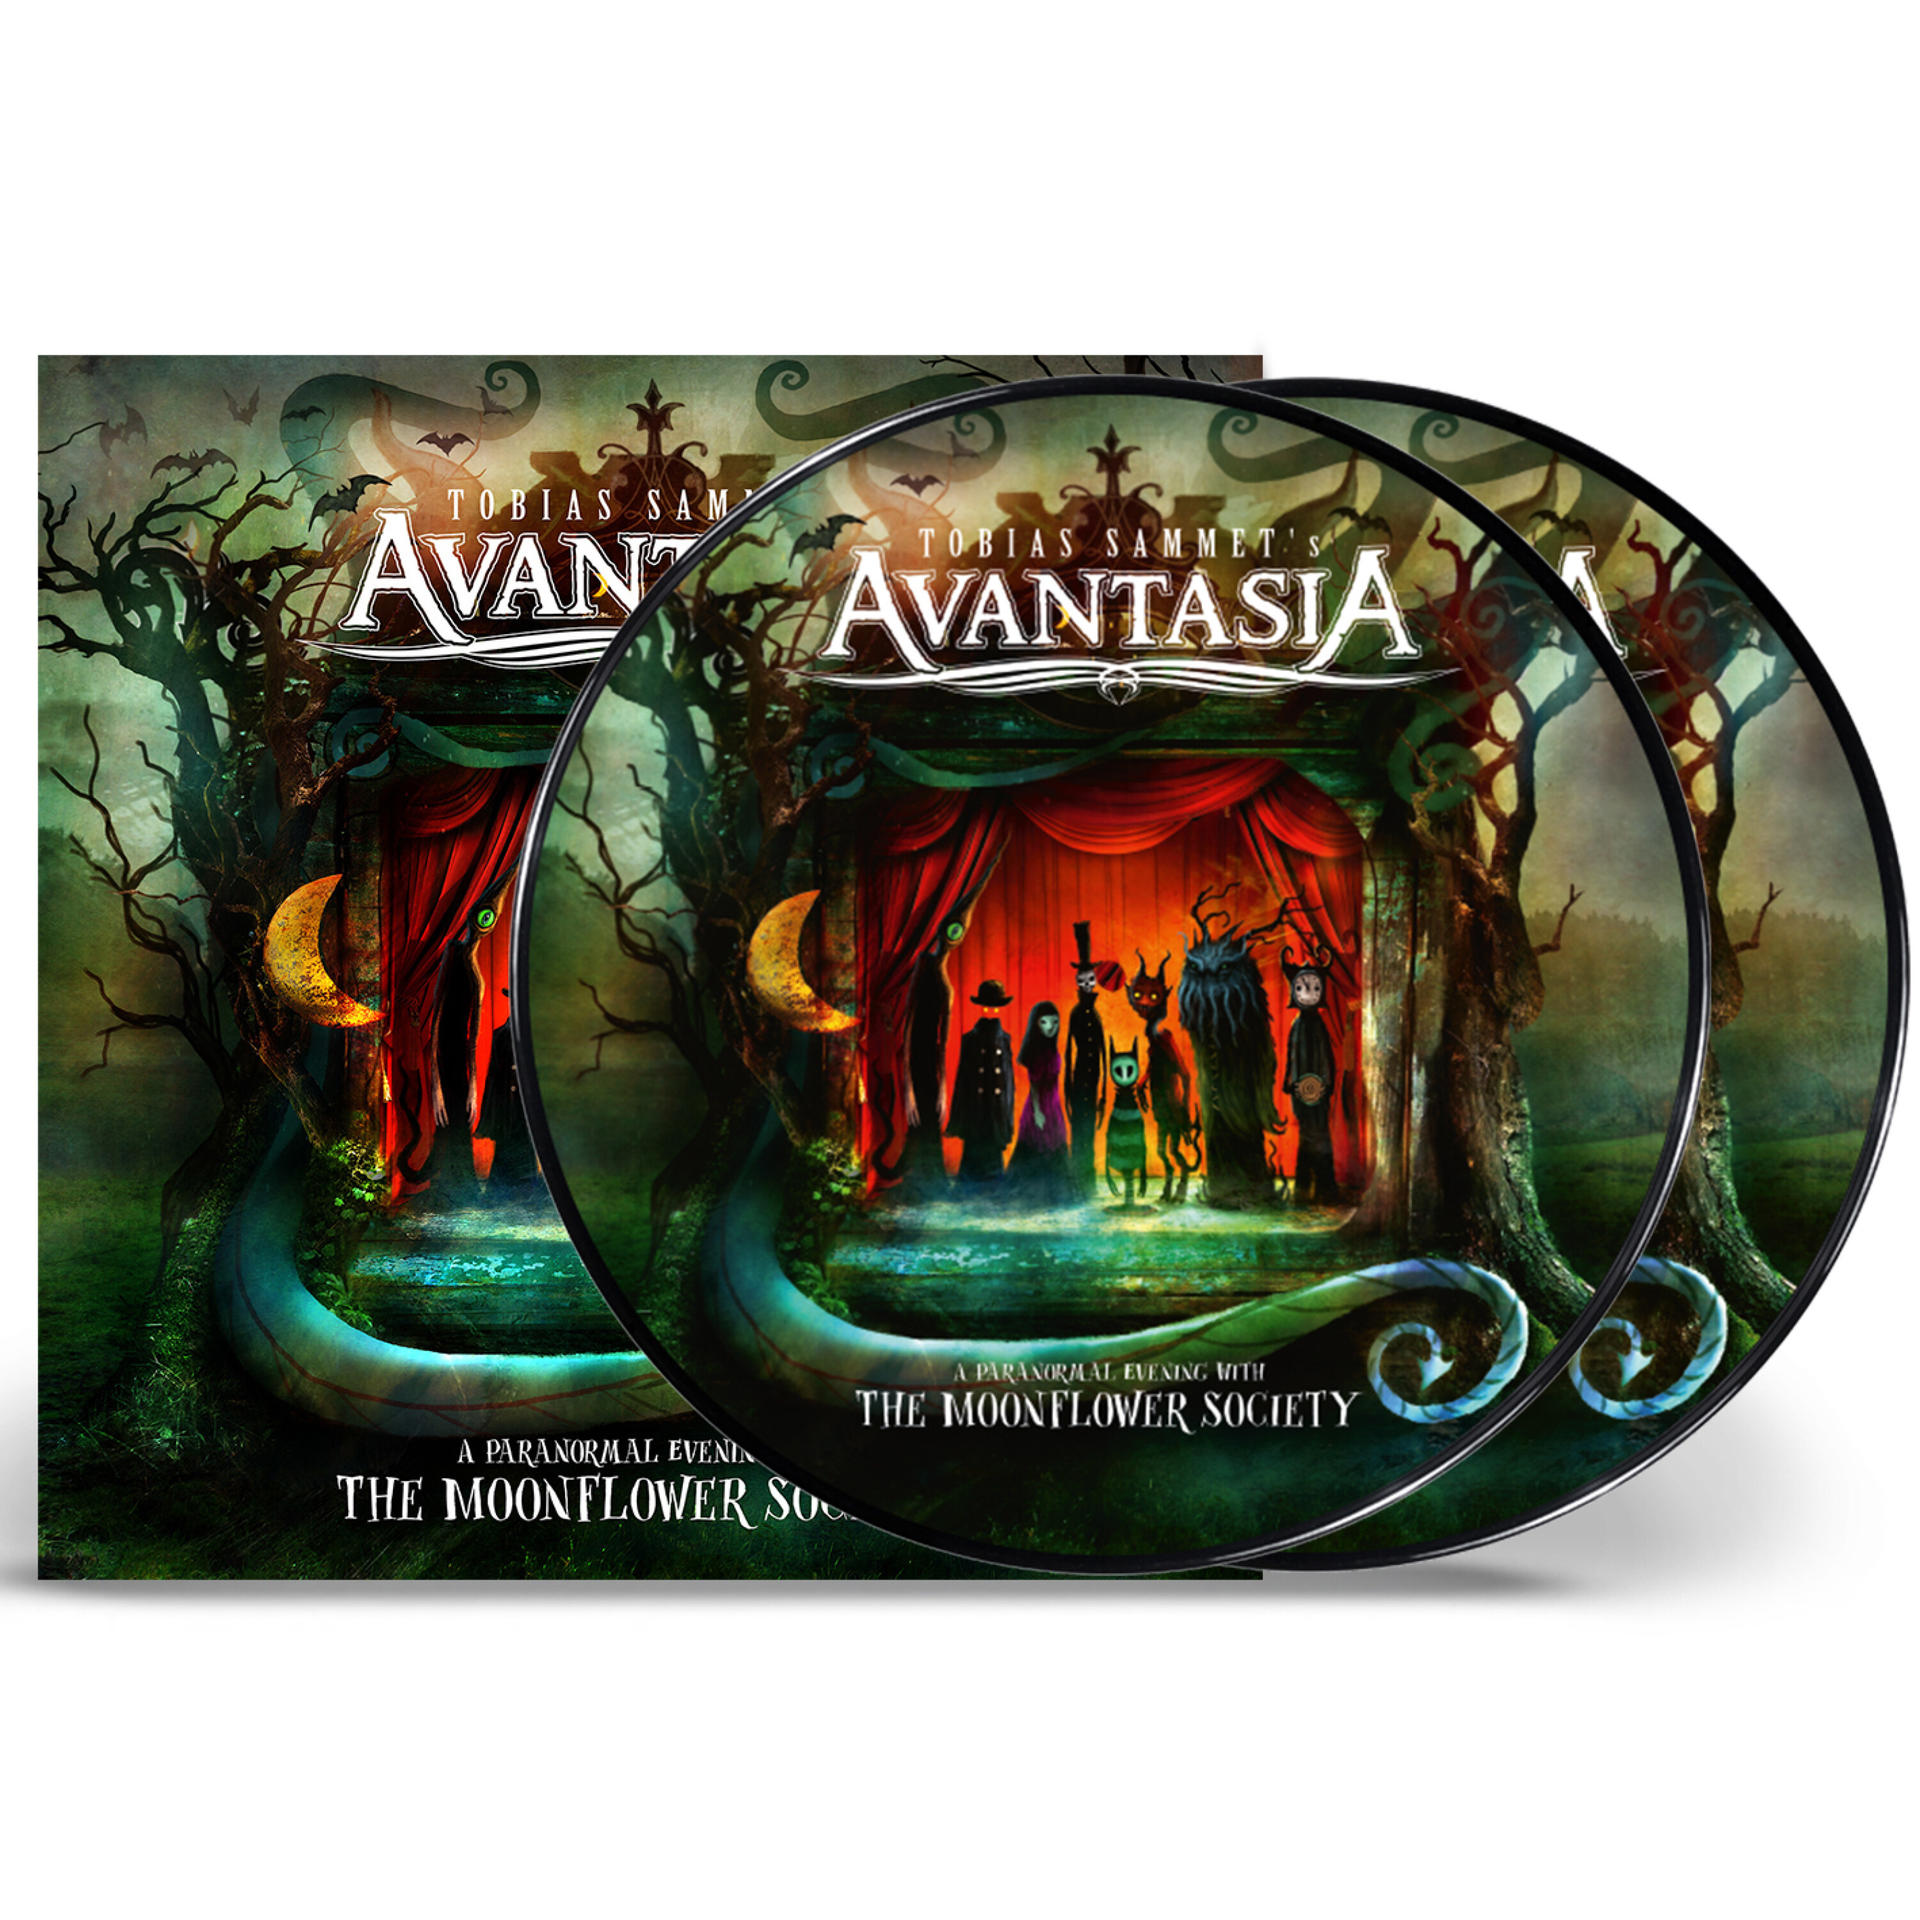 With Paranormal Moonflower The - - Society 2LP Evening (Vinyl) PIC Avantasia A